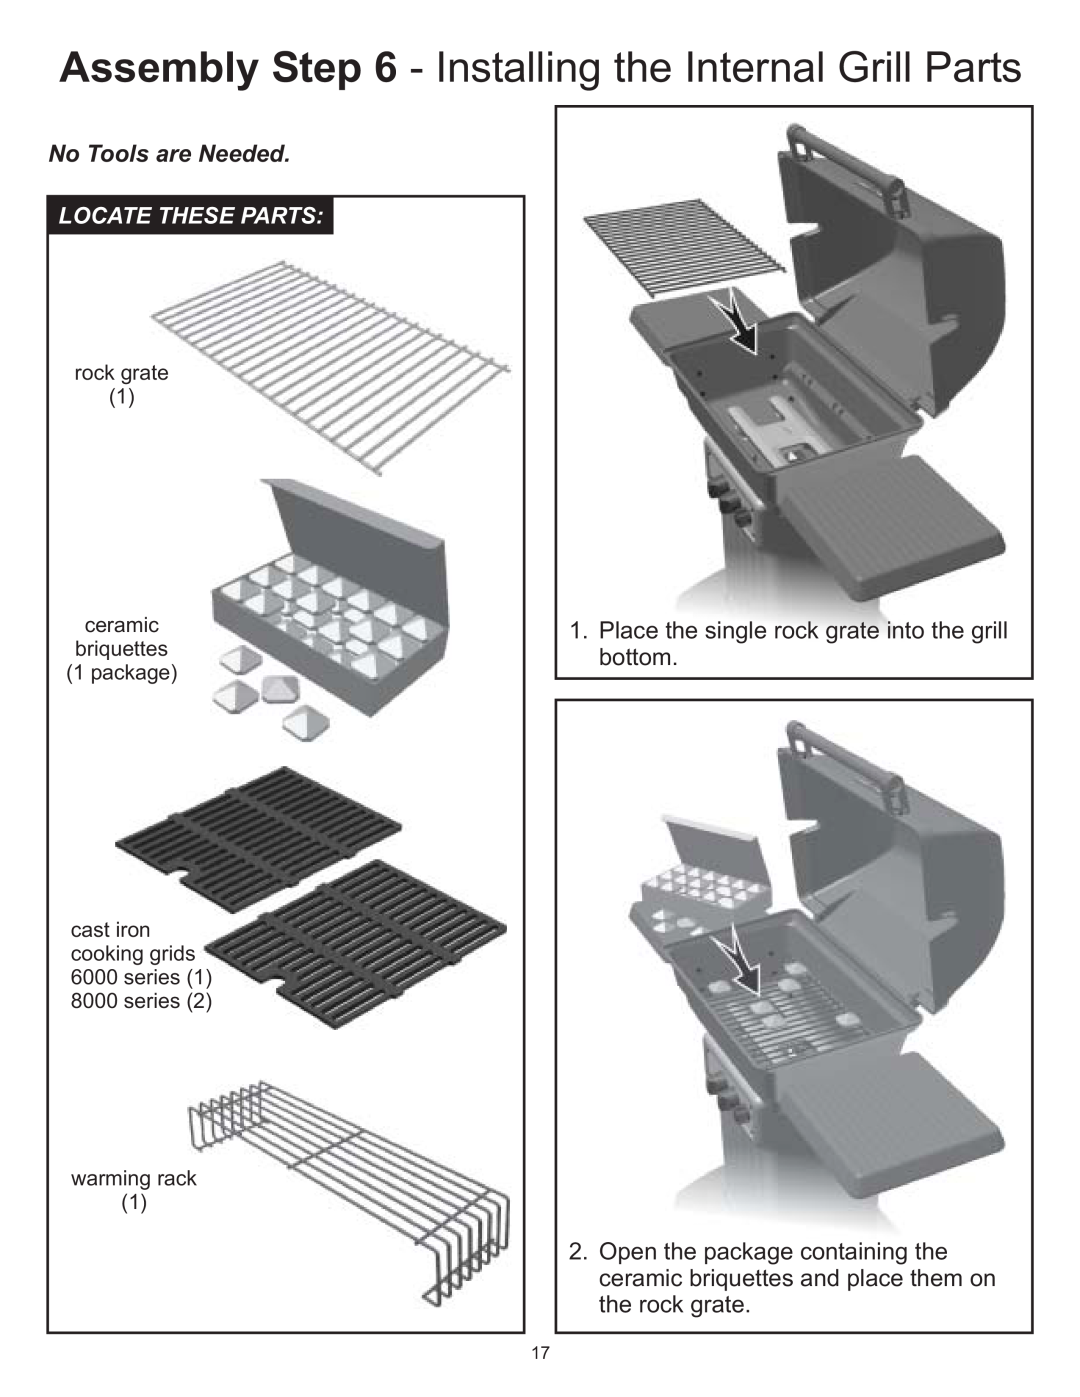 Vermont Casting VC0620P, VC0680P, VC0680N No Tools are Needed, rock grate 1 ceramic briquettes 1 package, warming rack 